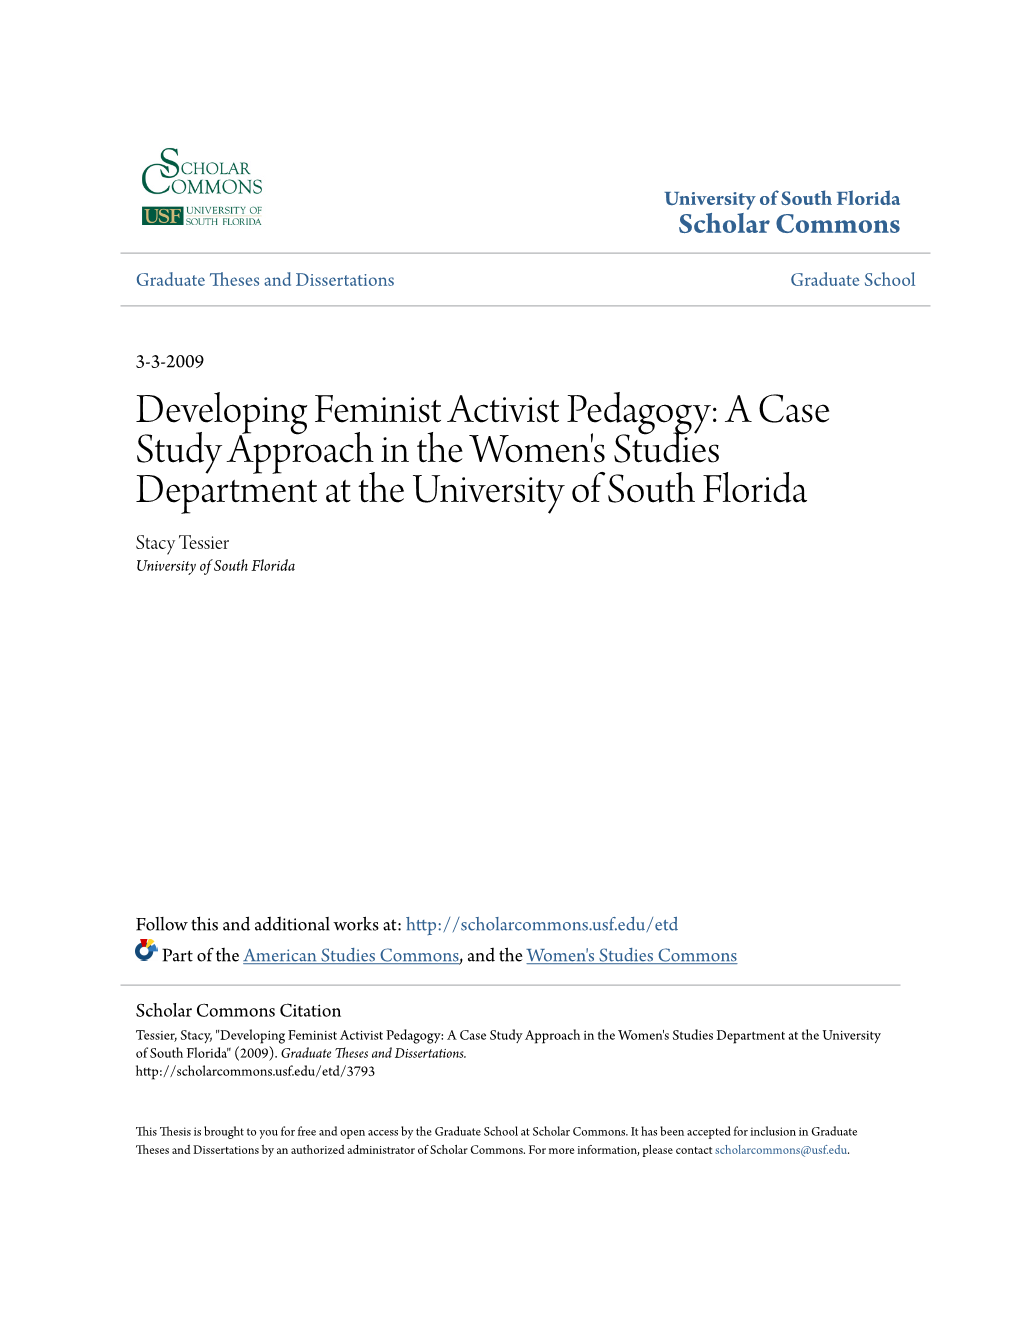 Developing Feminist Activist Pedagogy: a Case Study Approach in the Women's Studies Department at the University of South Fl